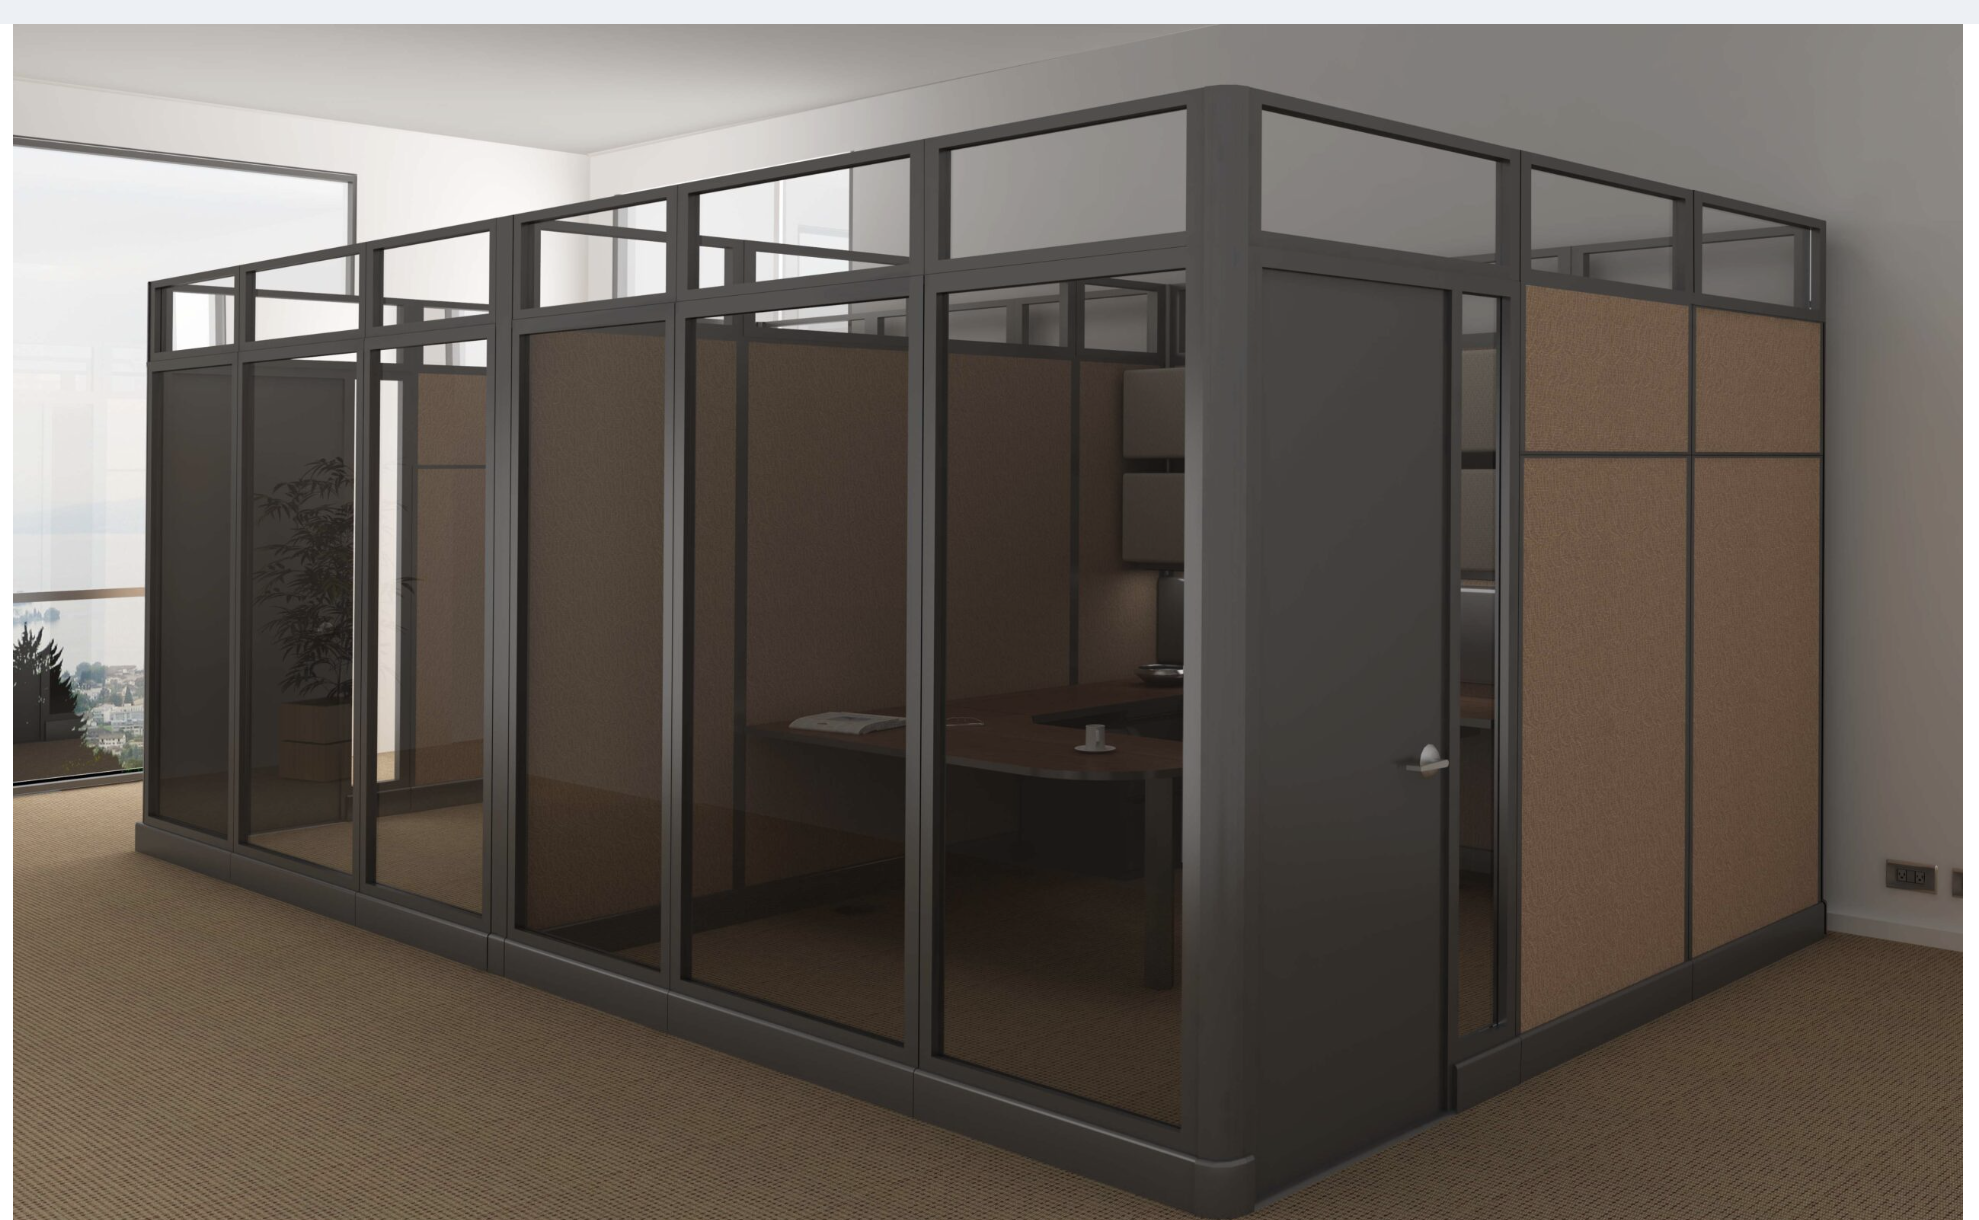 Cubicles for Sale: The Return of a Classic with a Modern Twist